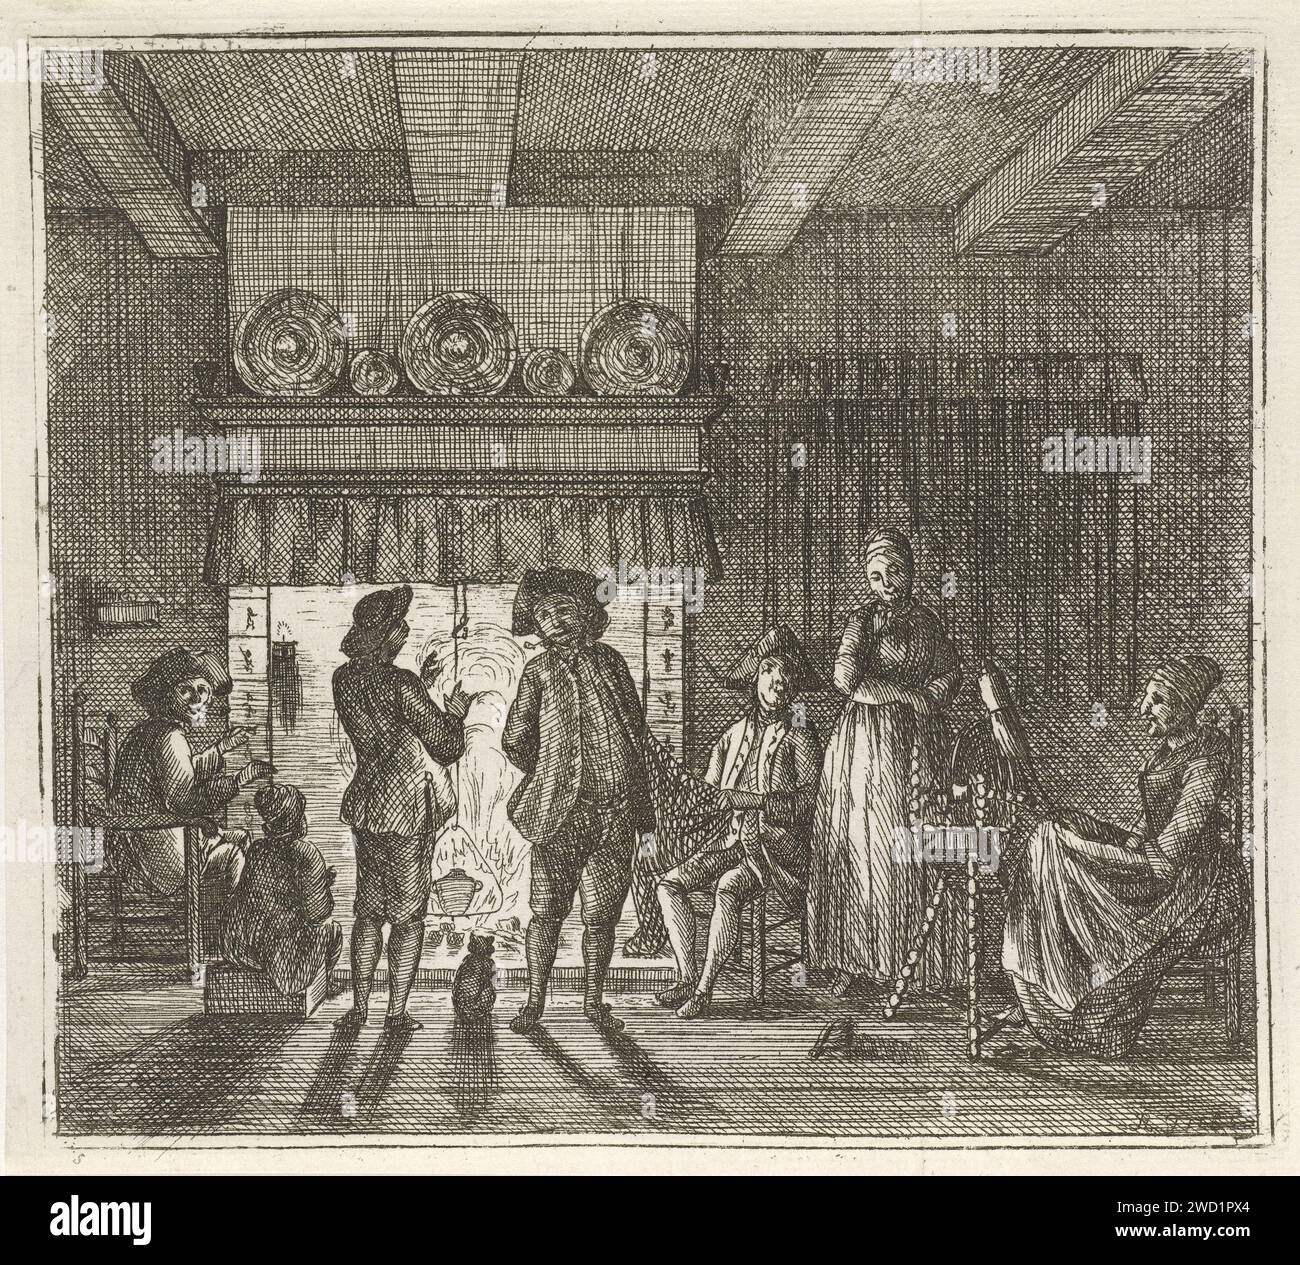 Interior with figures by fireplace, Rienk Jelgerhuis, 1765 print ...